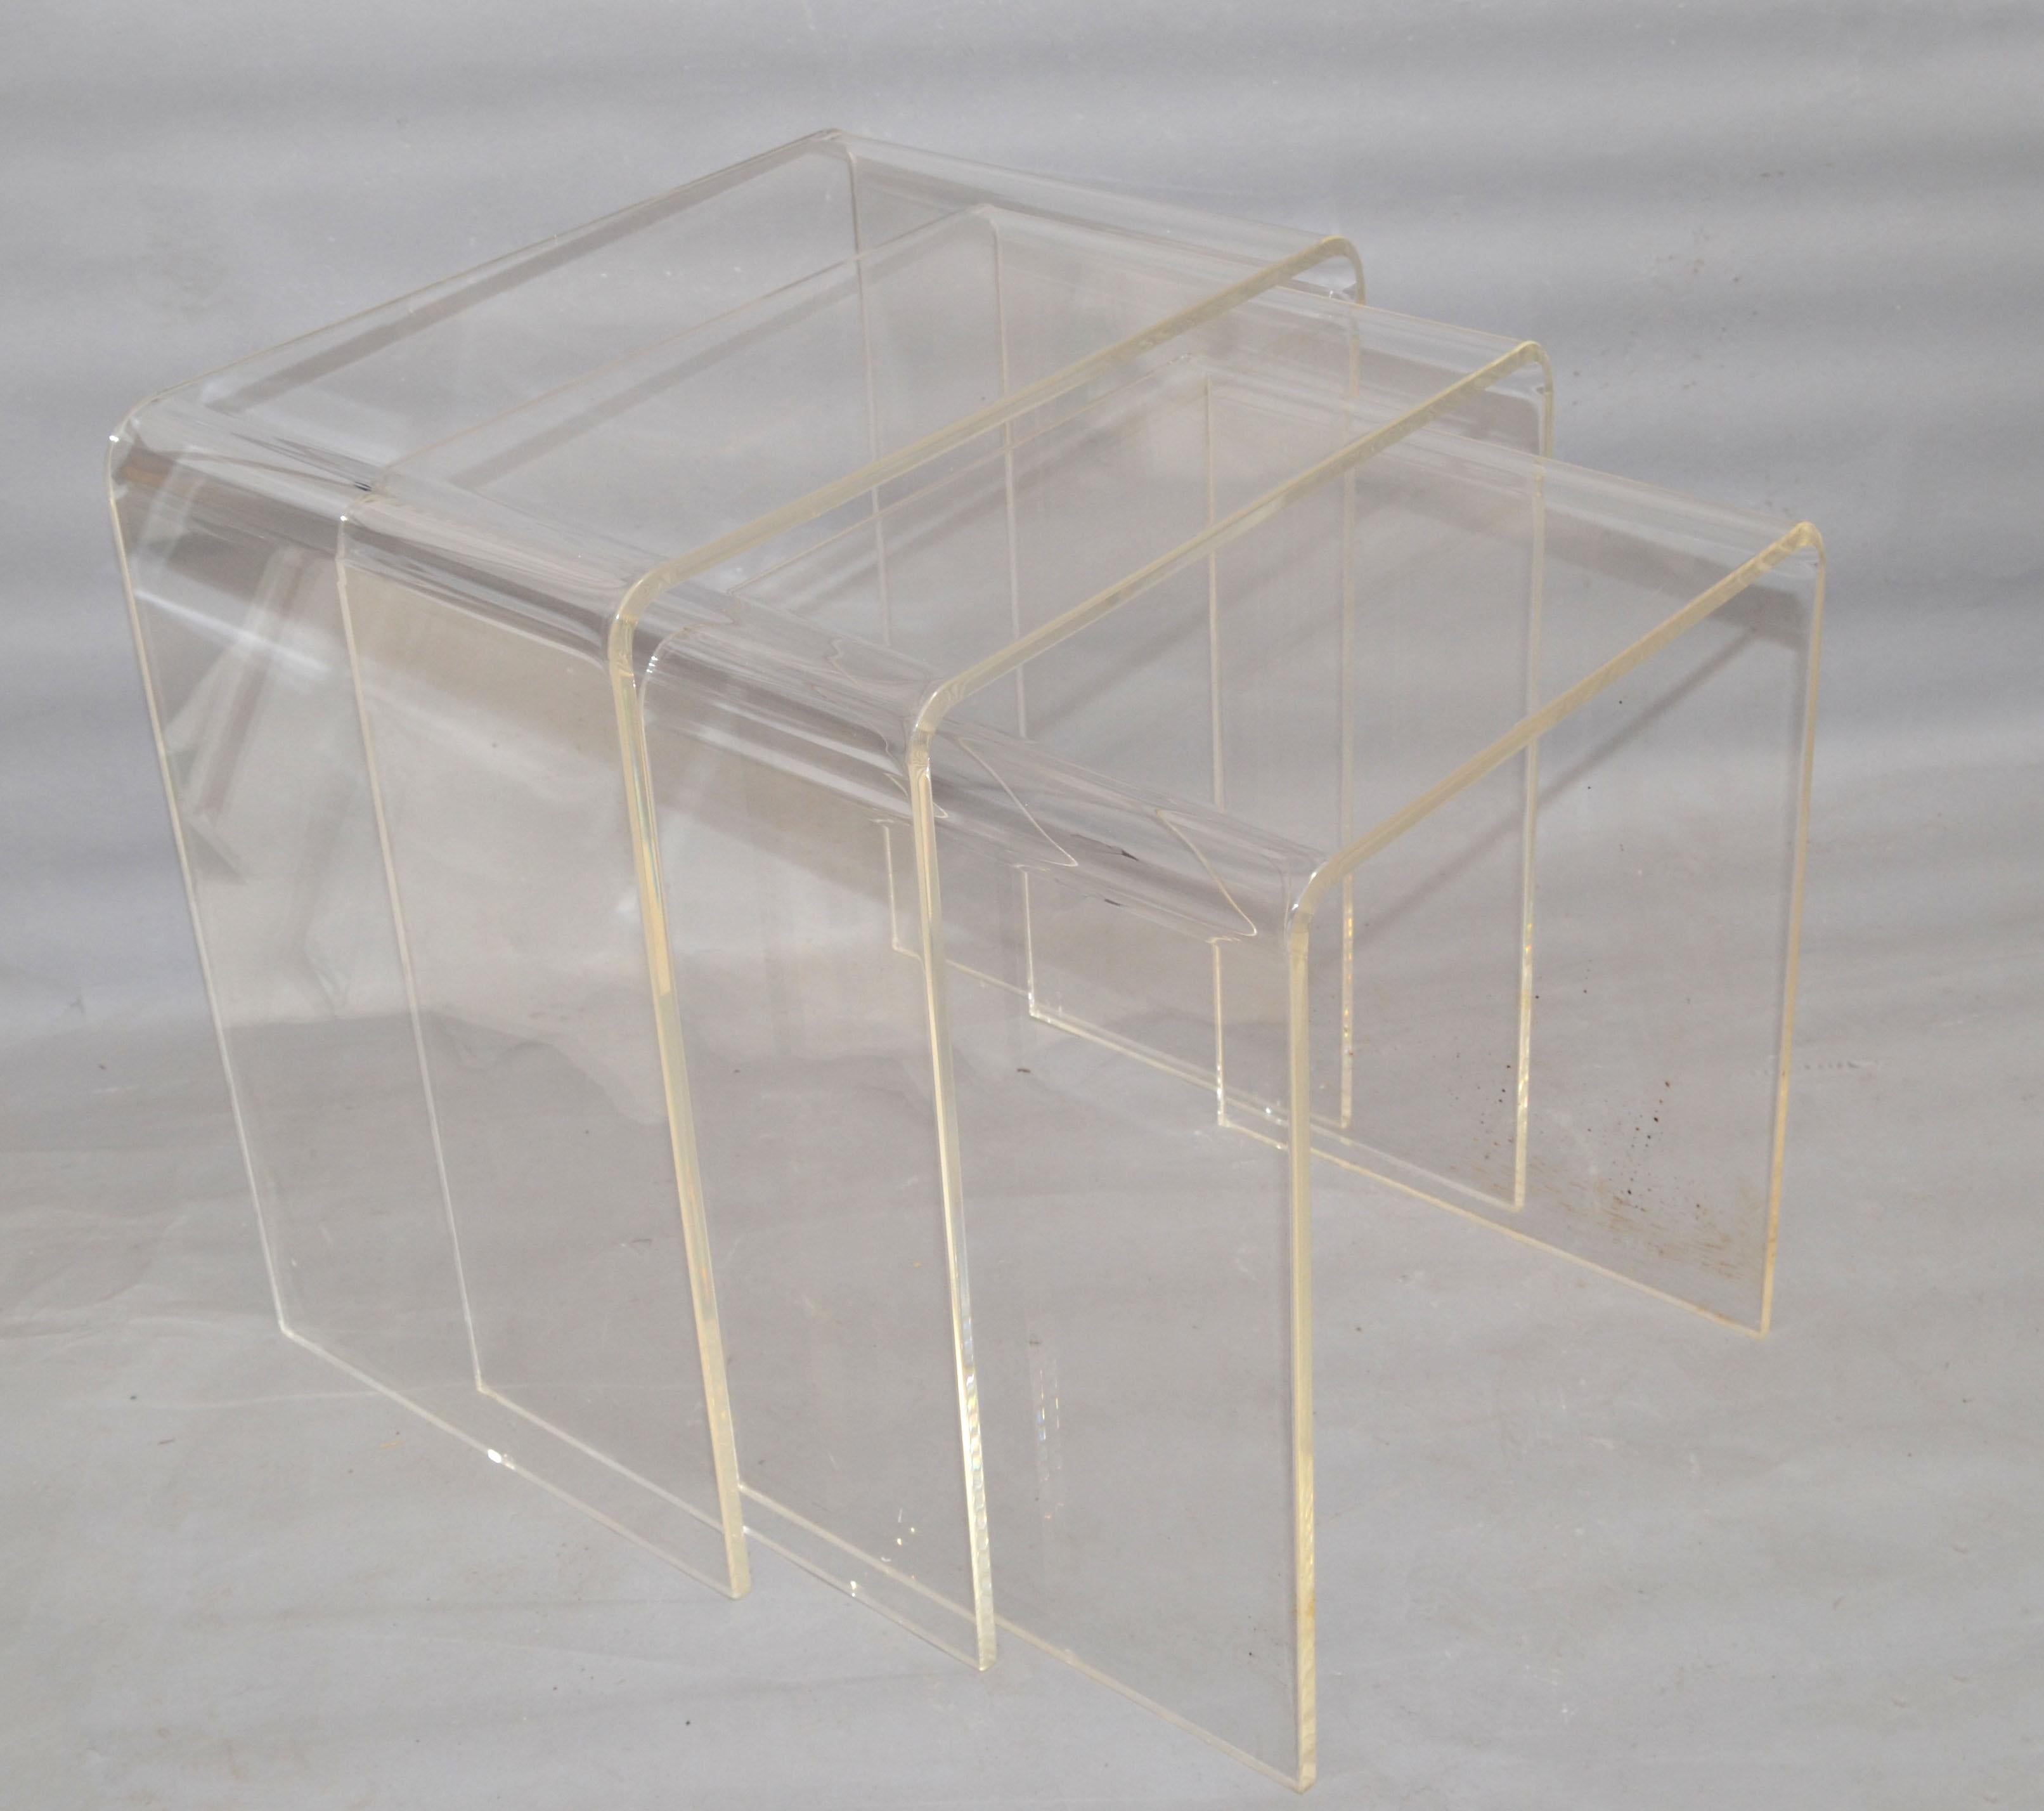 Late 20th Century Pair of Lucite Waterfall Nesting Tables / Stacking Tables, Stools, Set of 3